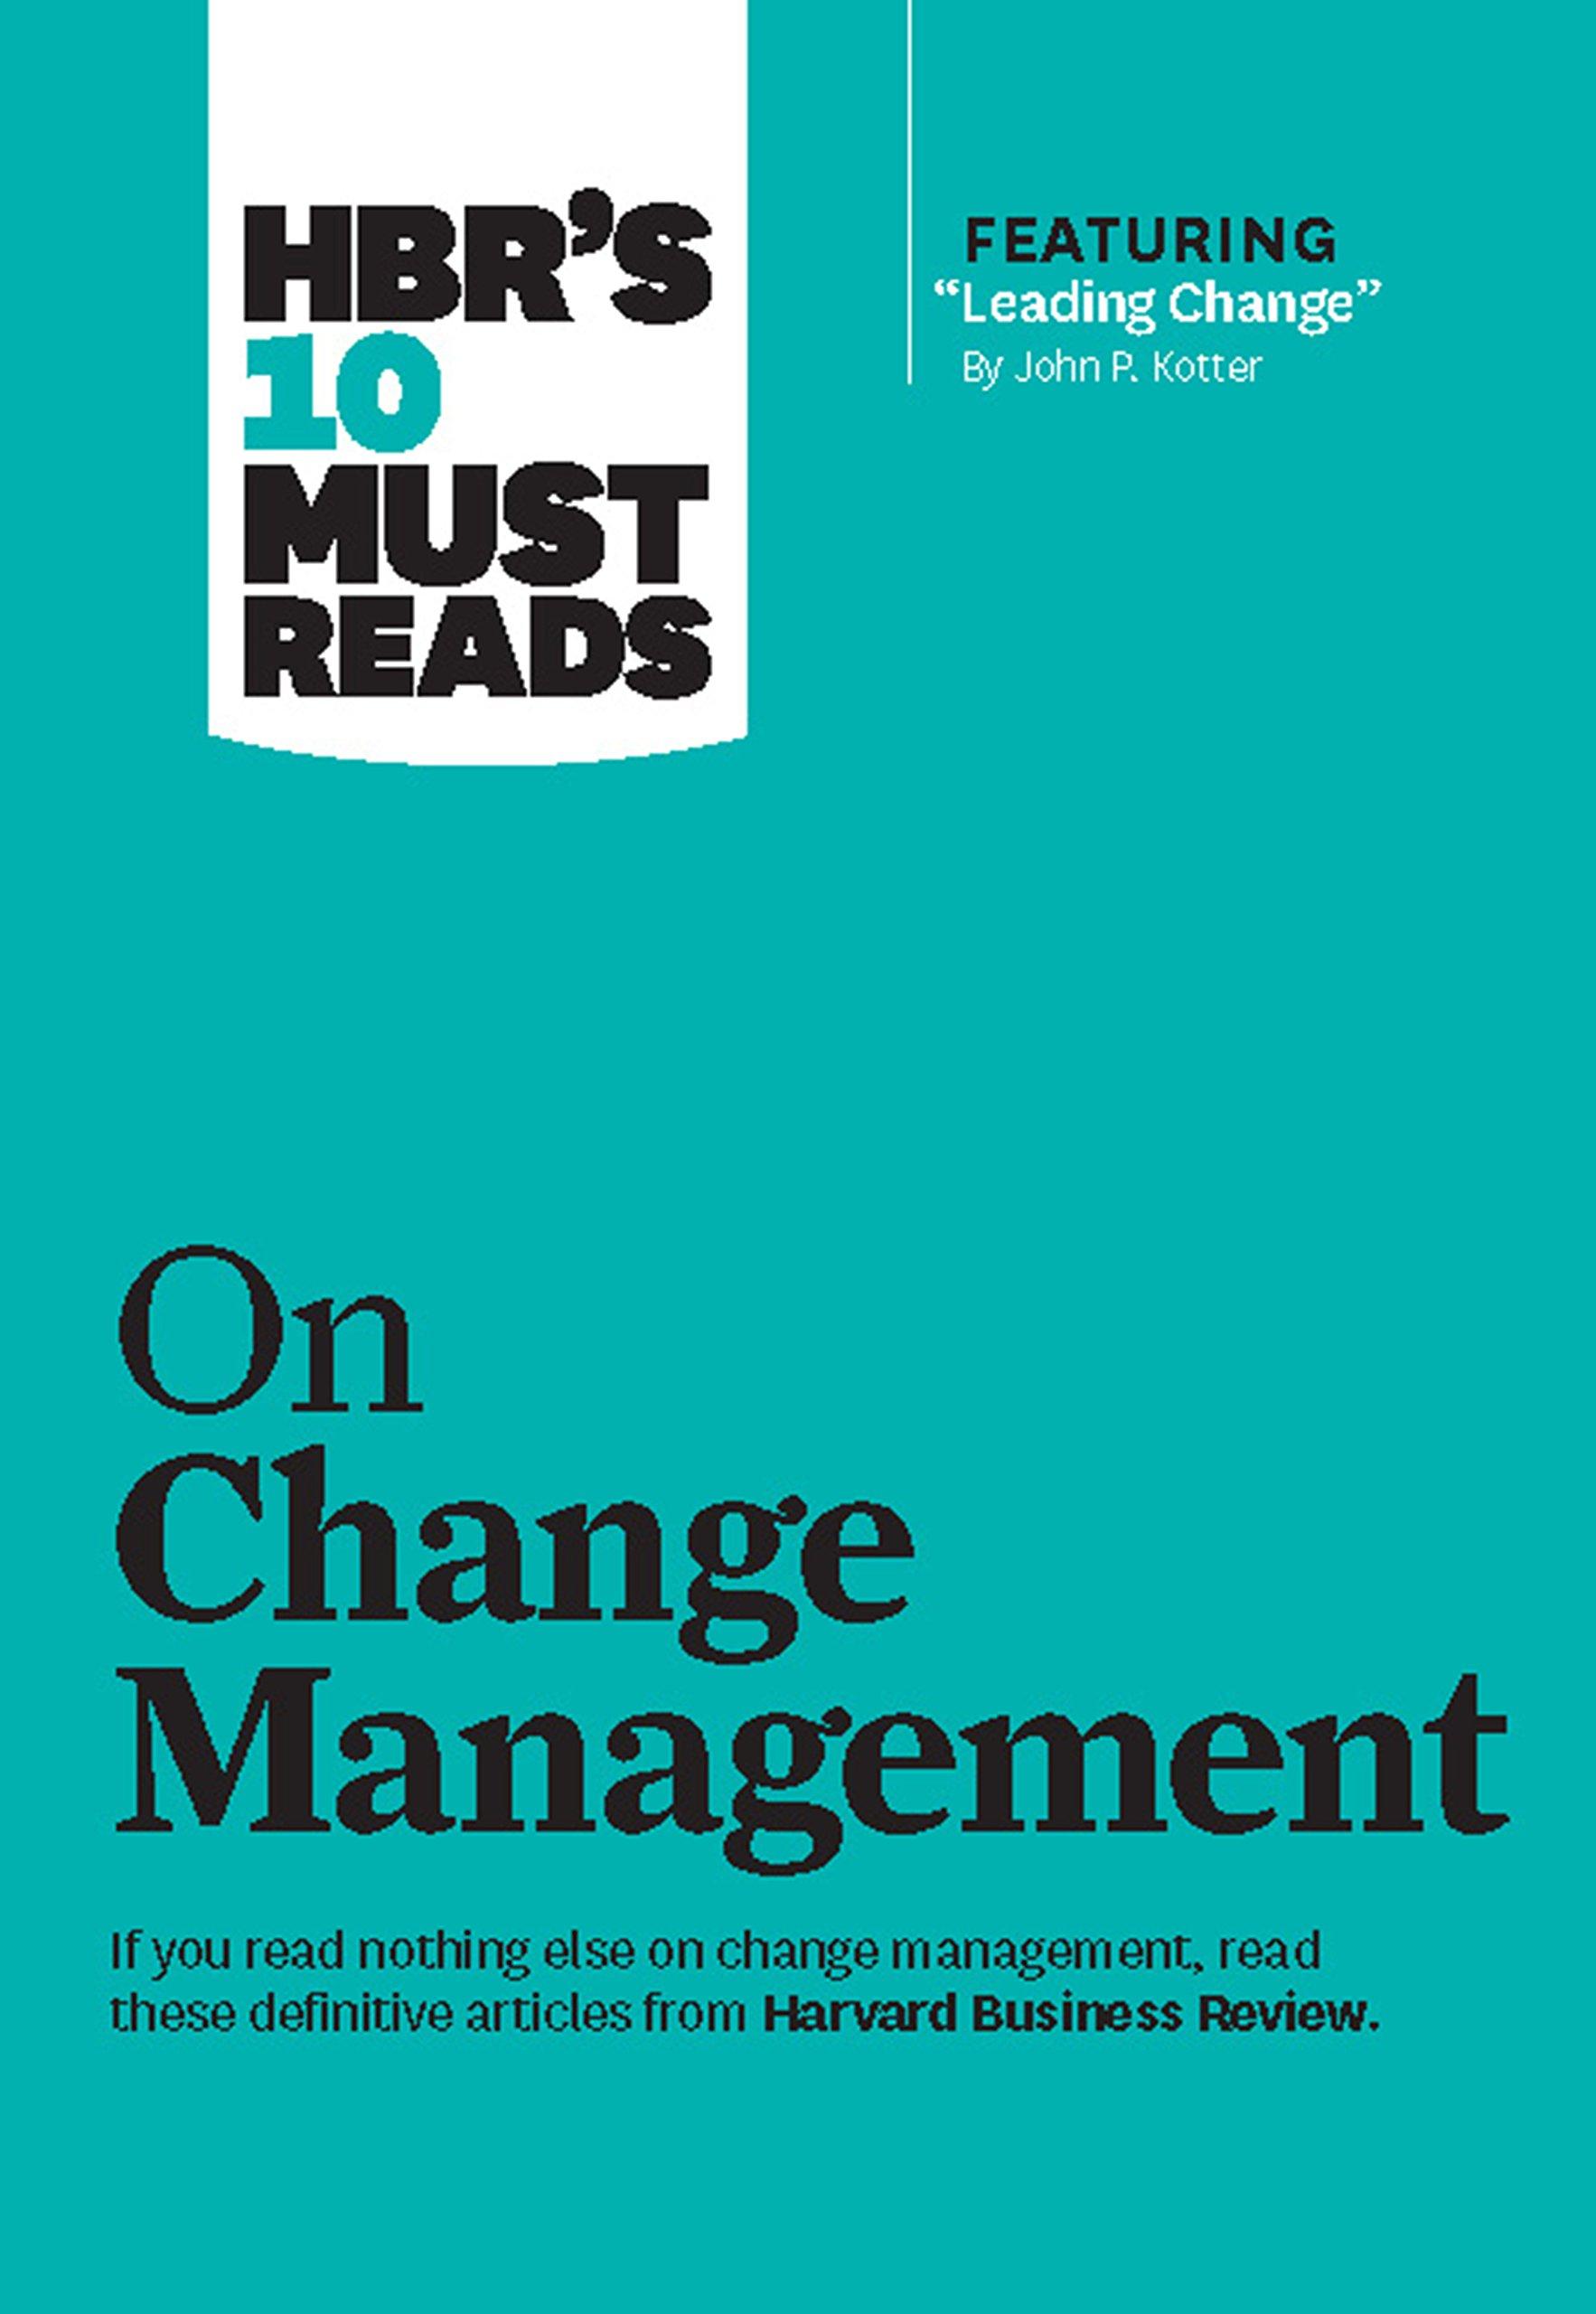 hbrs 10 must reads on change management 1st edition harvard business review, john p. kotter, w. chan kim,